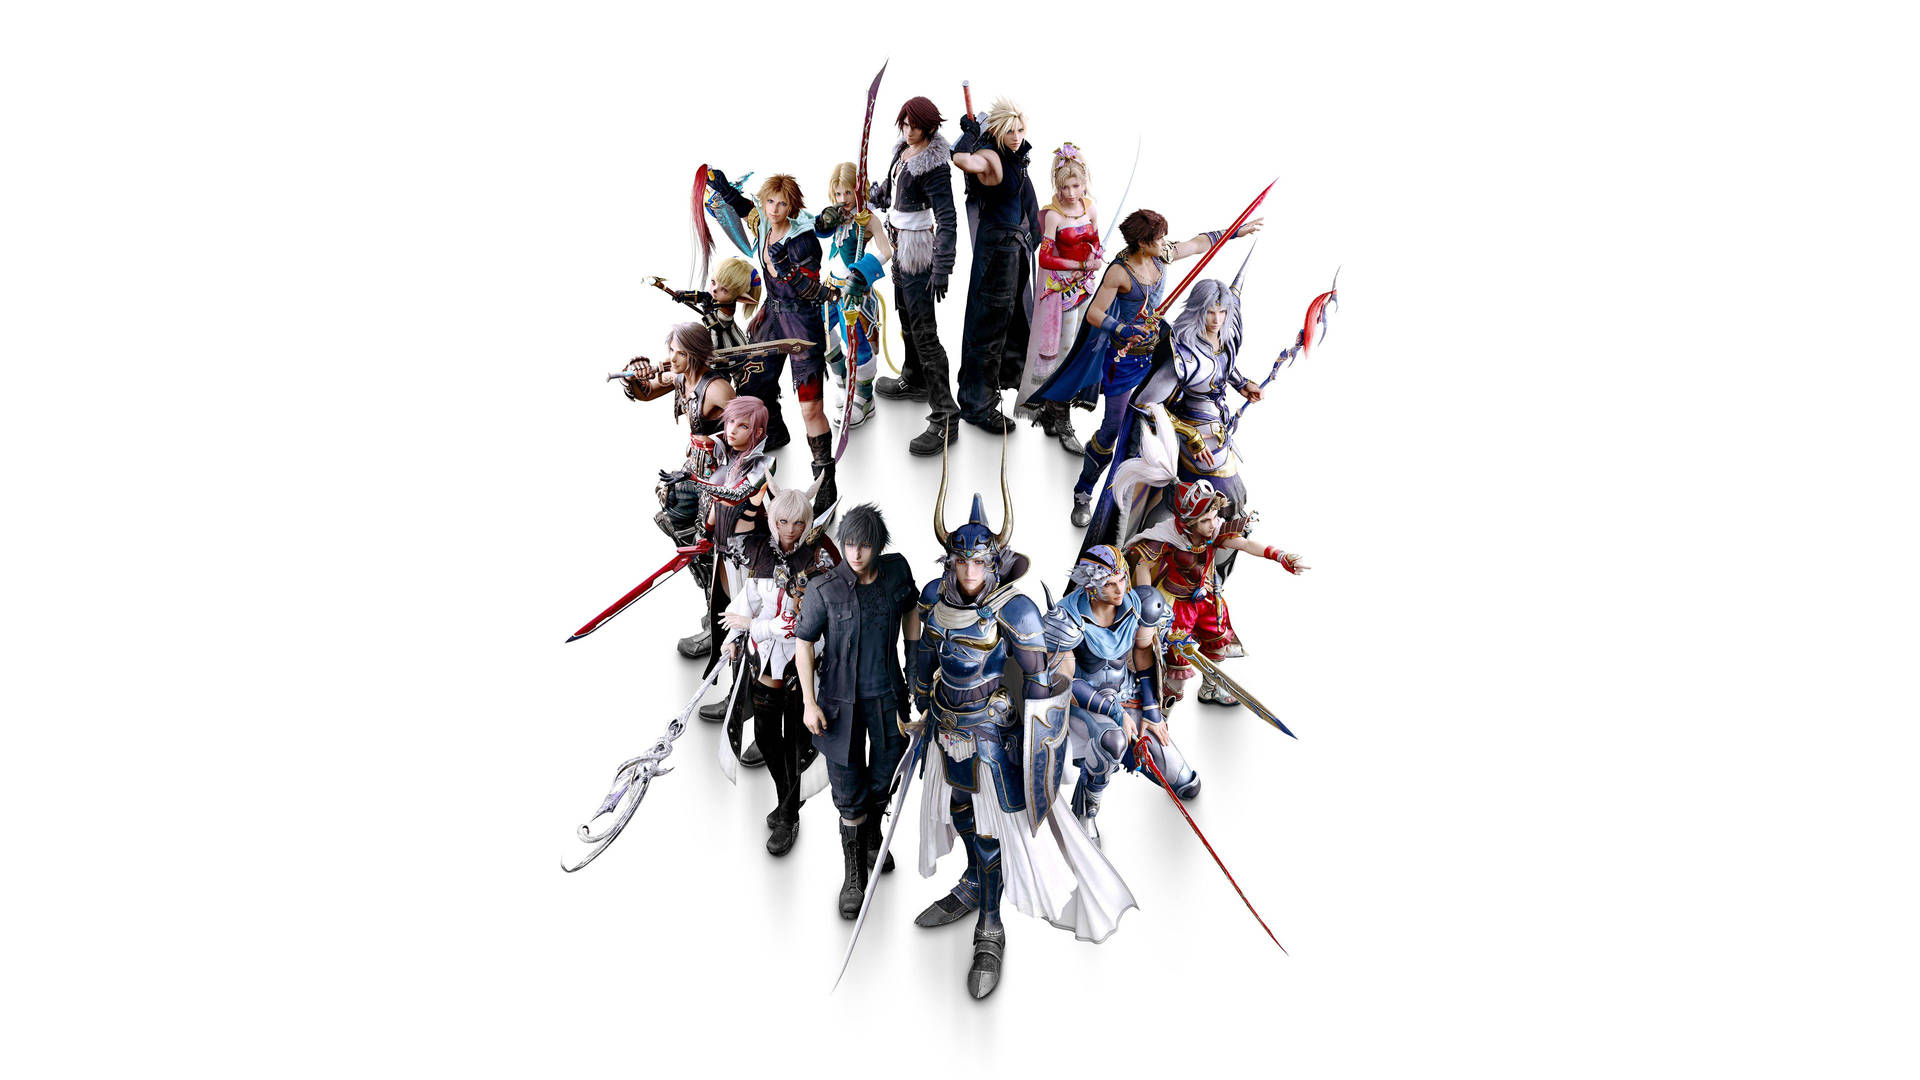 A Group Of People With Swords In Front Of A White Background Background